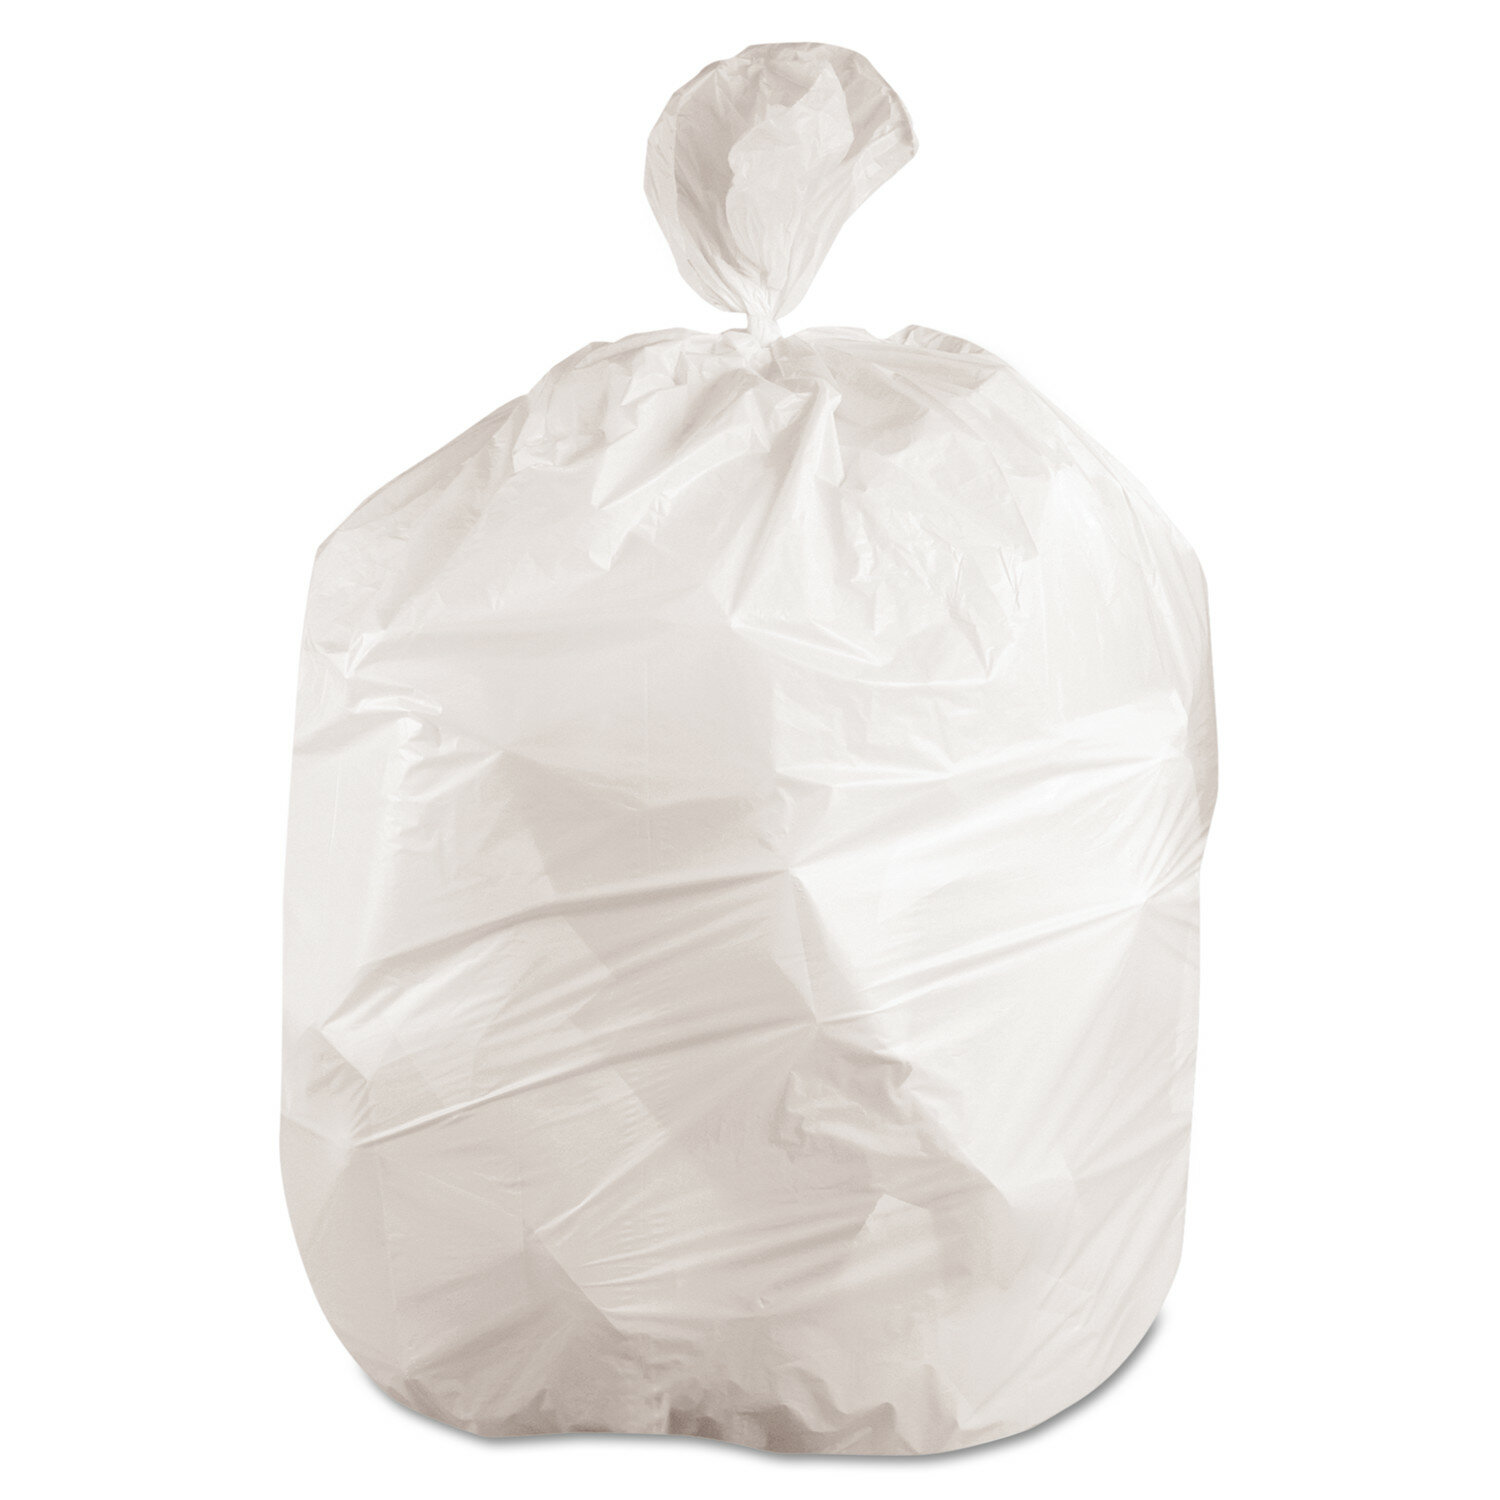 Halsted 130 Gallons Plastic Trash Bags - 5 Count